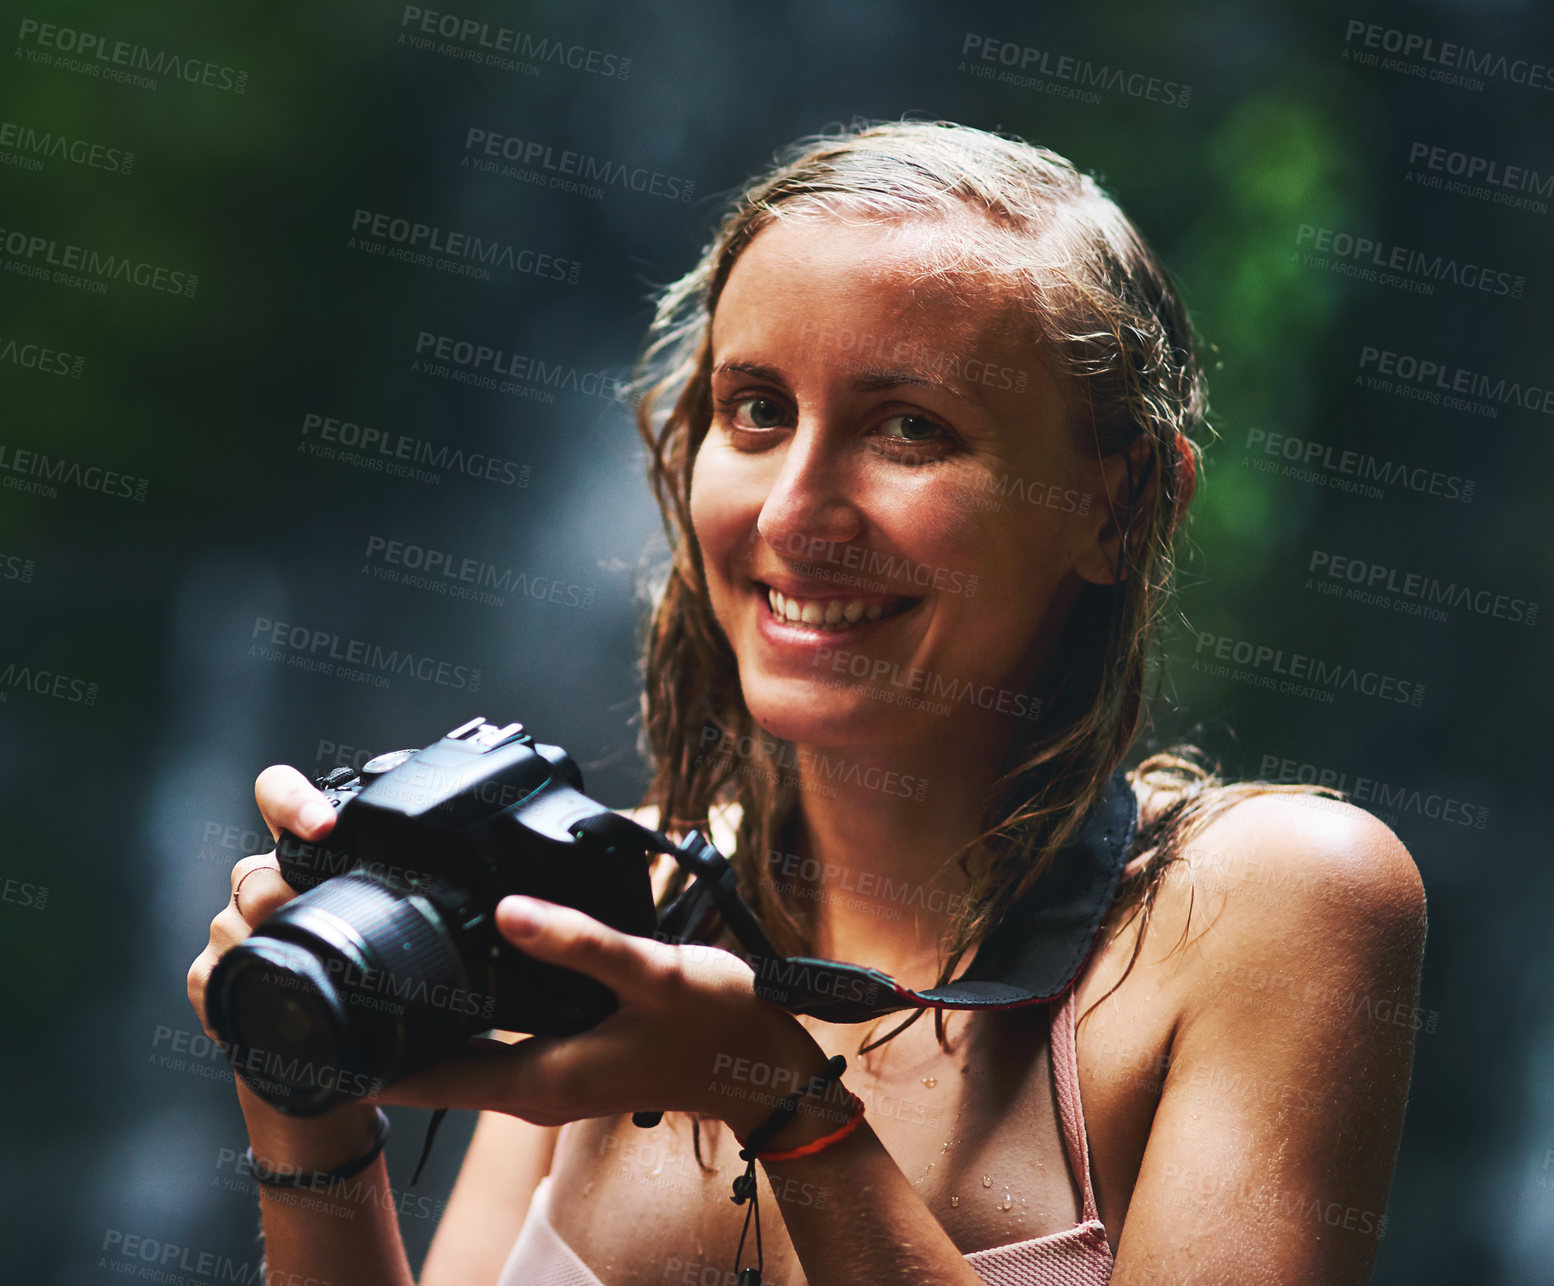 Buy stock photo Shot of a smiling young woman holding up a camera and looking happy as can be